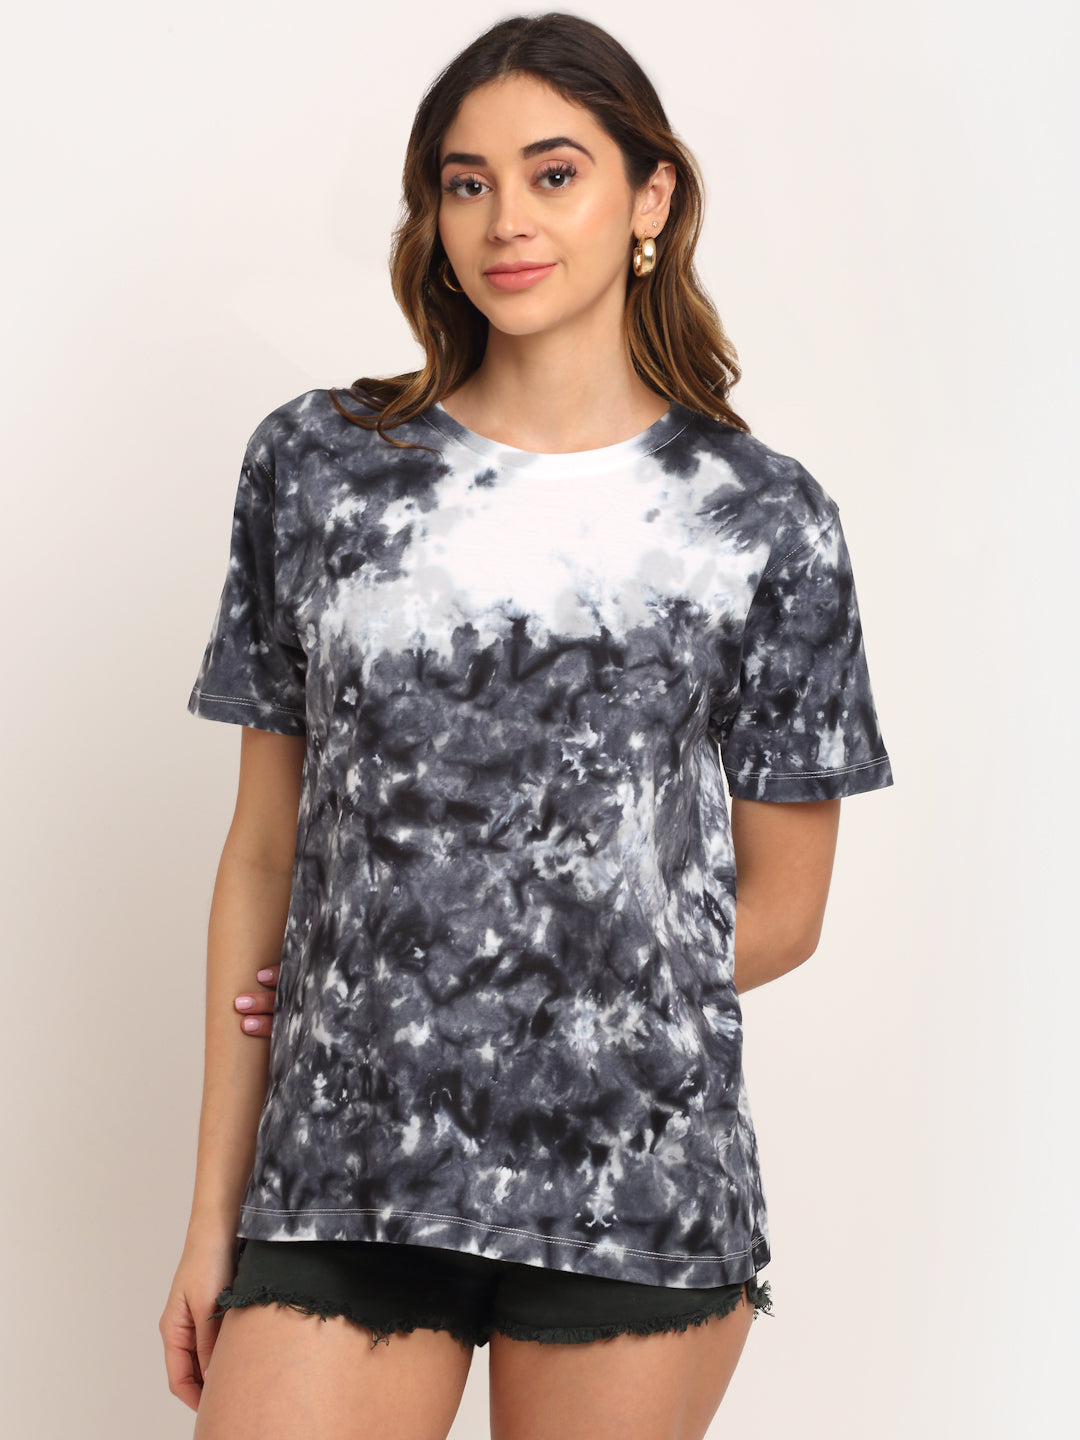 Abstract Pattern, Women Combed Cotton Tie & Dye Grey T-Shirt